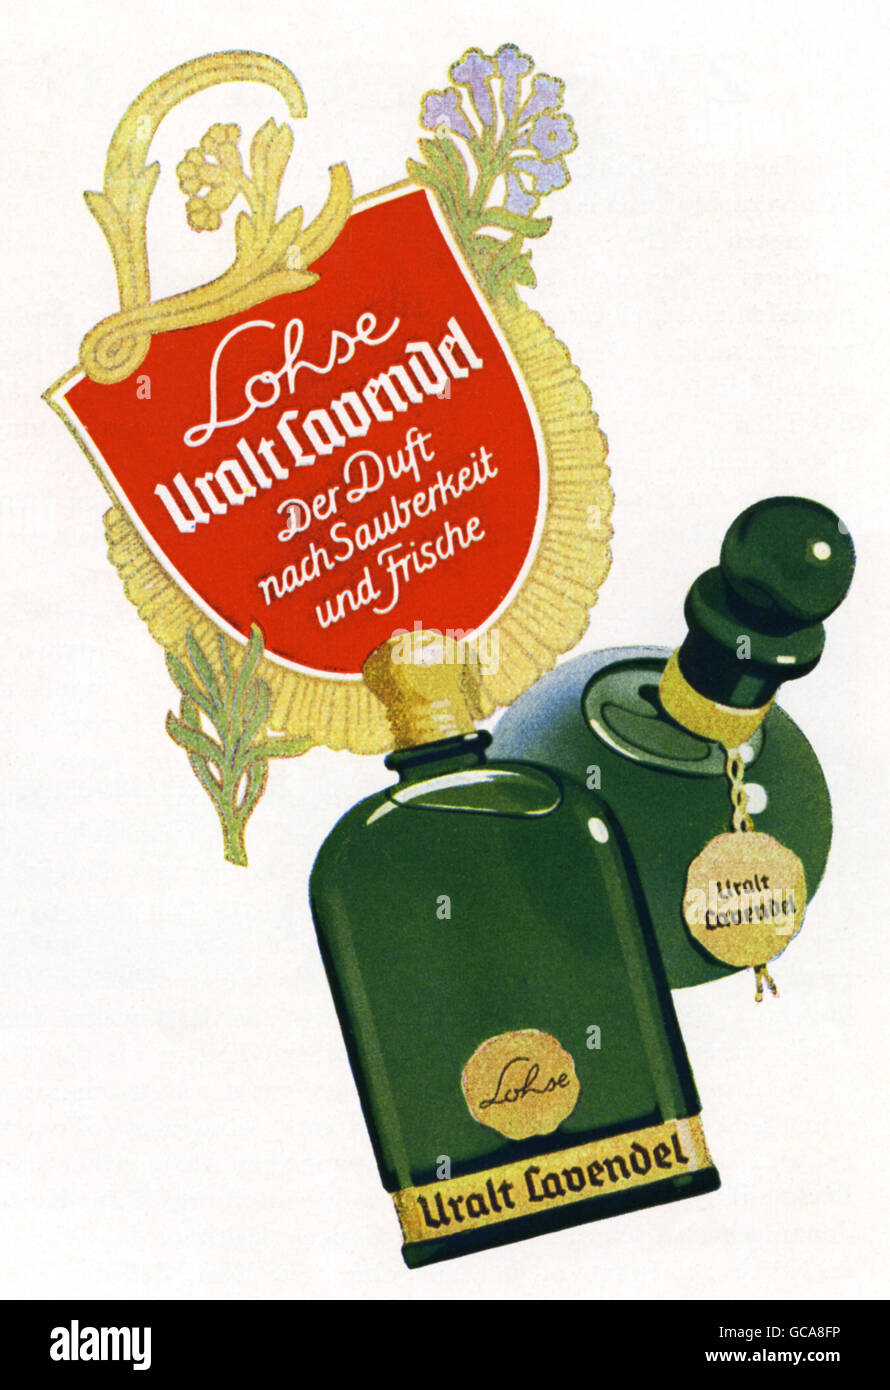 advertising, cosmetics, perfume, Lohse Uralt Lavendel, advert, Germany, 1942, Additional-Rights-Clearences-Not Available Stock Photo